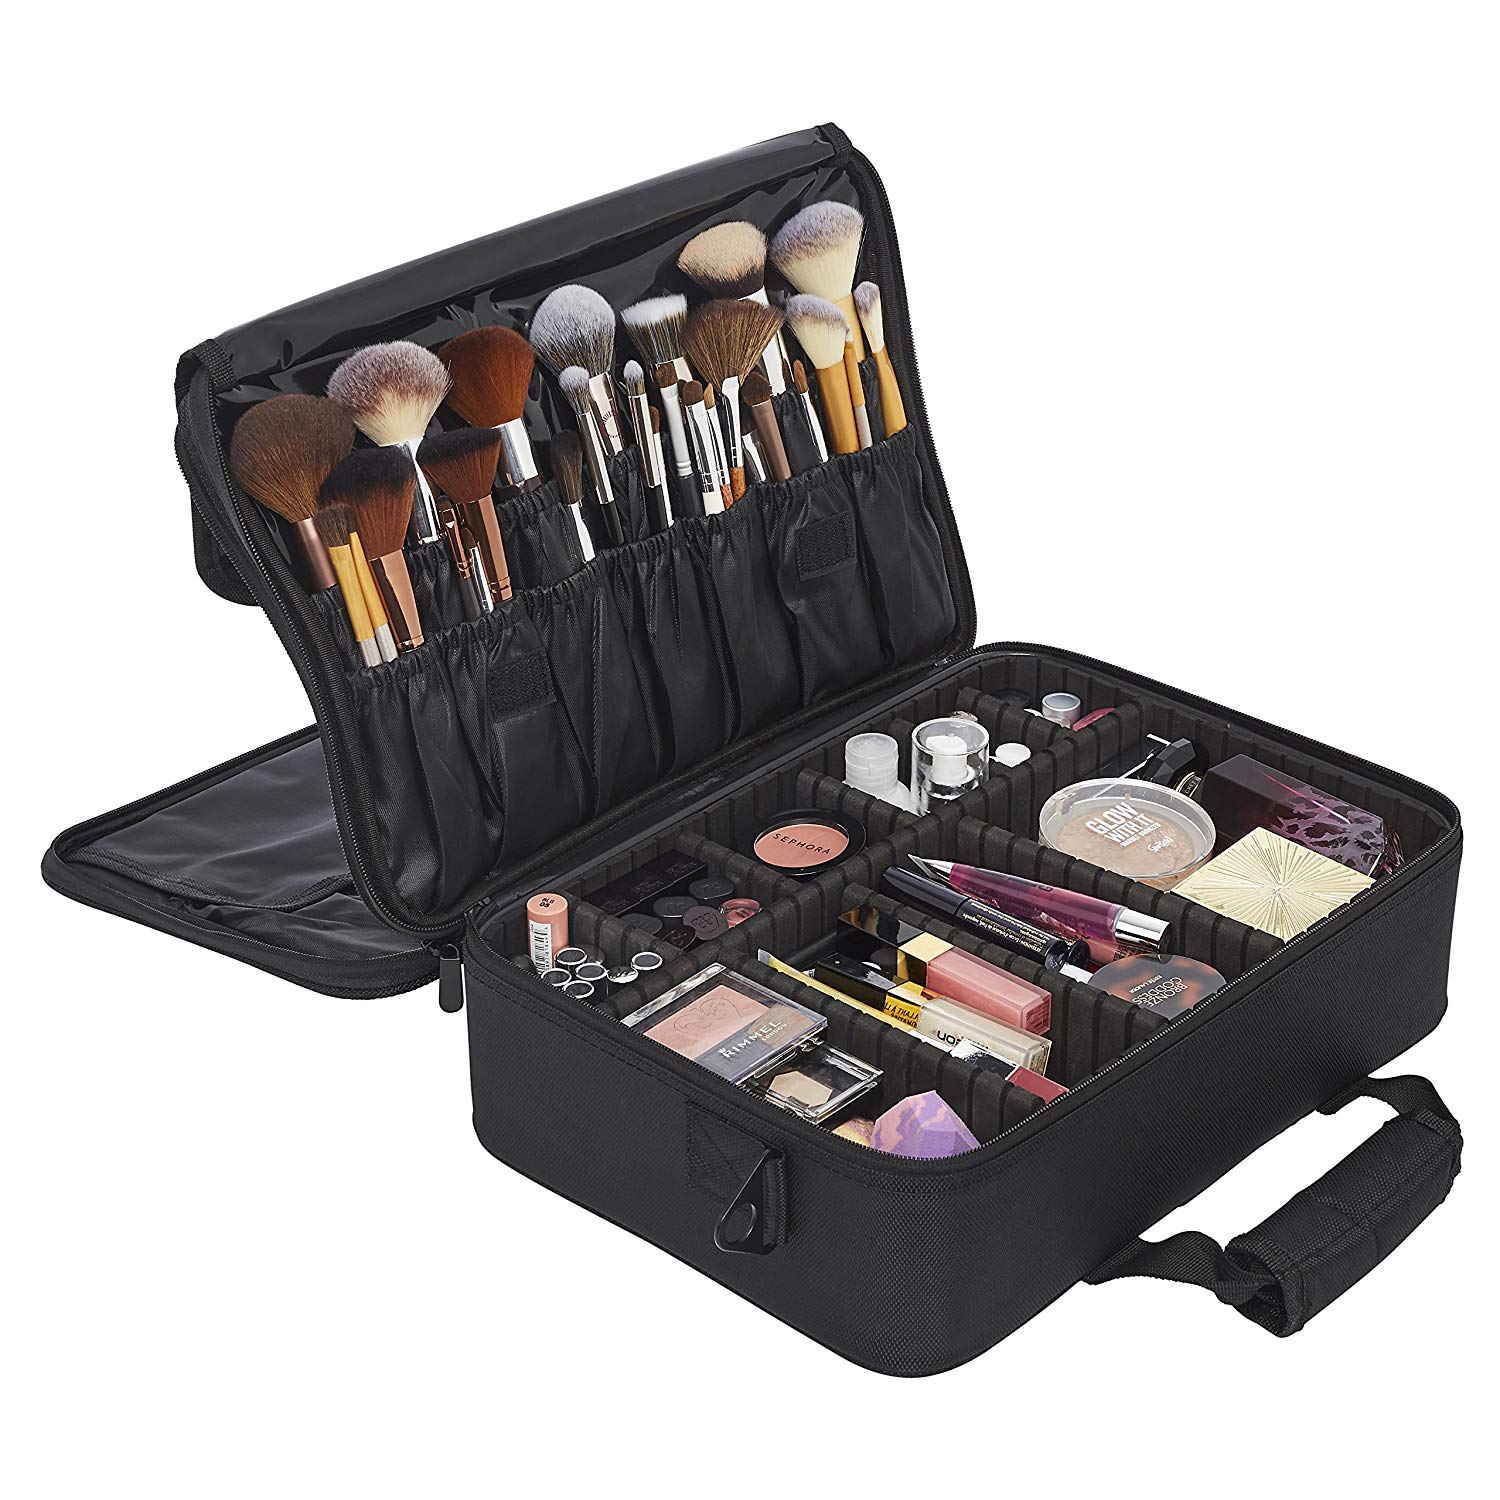 Large Travel Makeup Bag (3 Layer) with Adjustable Dividers, Multipurpose Cosmetic Organizer